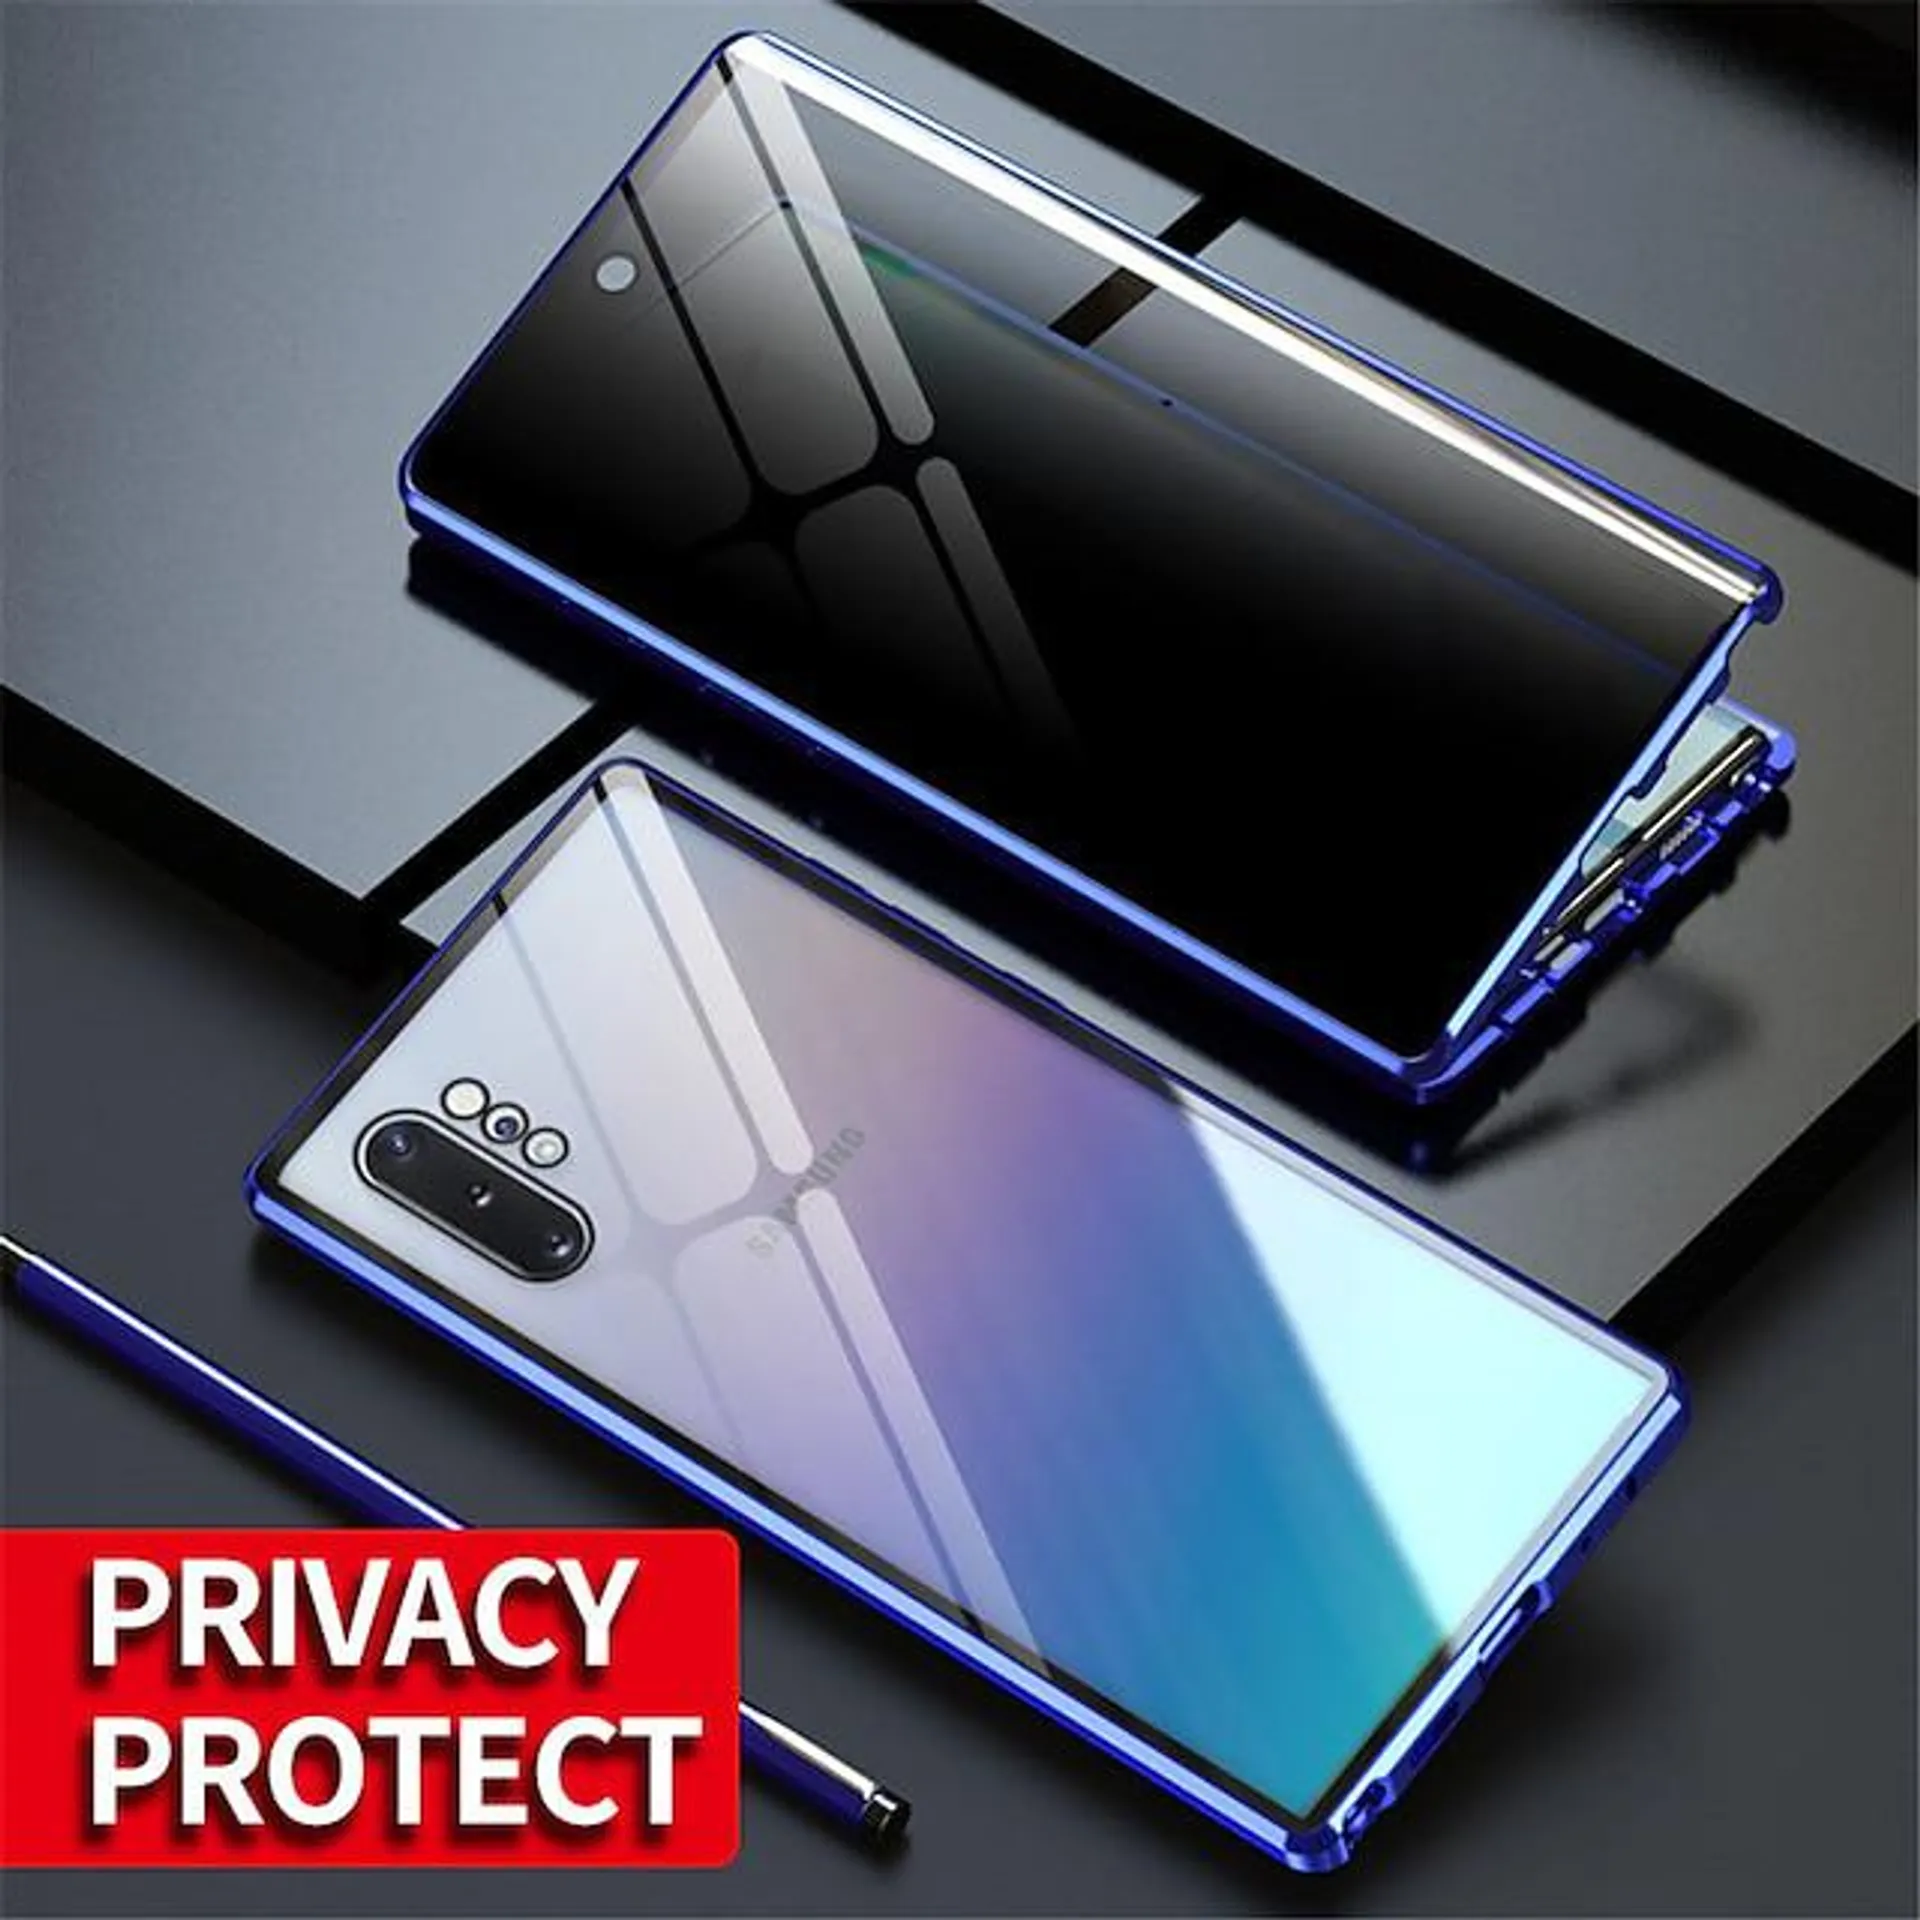 Phone Case For Samsung Galaxy S23 S22 S21 S20 Ultra Plus FE Note 20 Ultra 10 Plus A71 A51 A70 A50 Magnetic Adsorption Full Body Protective Anti peep Shockproof Transparent Privacy Tempered Glass